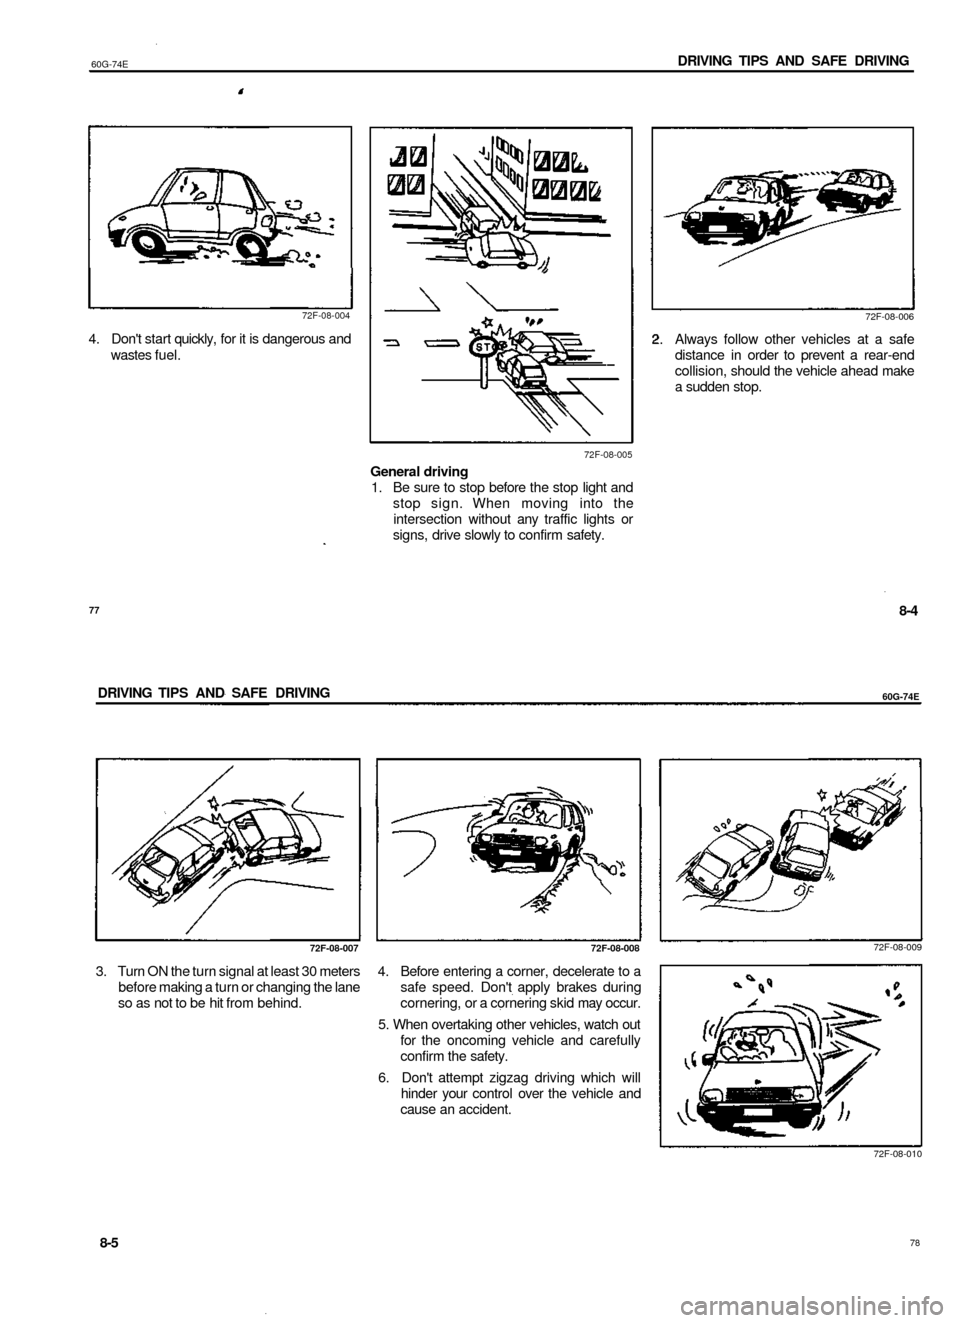 SUZUKI BALENO 1999 1.G Owners Guide 
60G-74E 
DRIVING TIPS AND SAFE DRIVING

72F-08-004

4. Dont start quickly, for it is dangerous and

wastes fuel. 
72F-08-006

72F-08-005

General driving

1. Be sure to stop before the stop light an